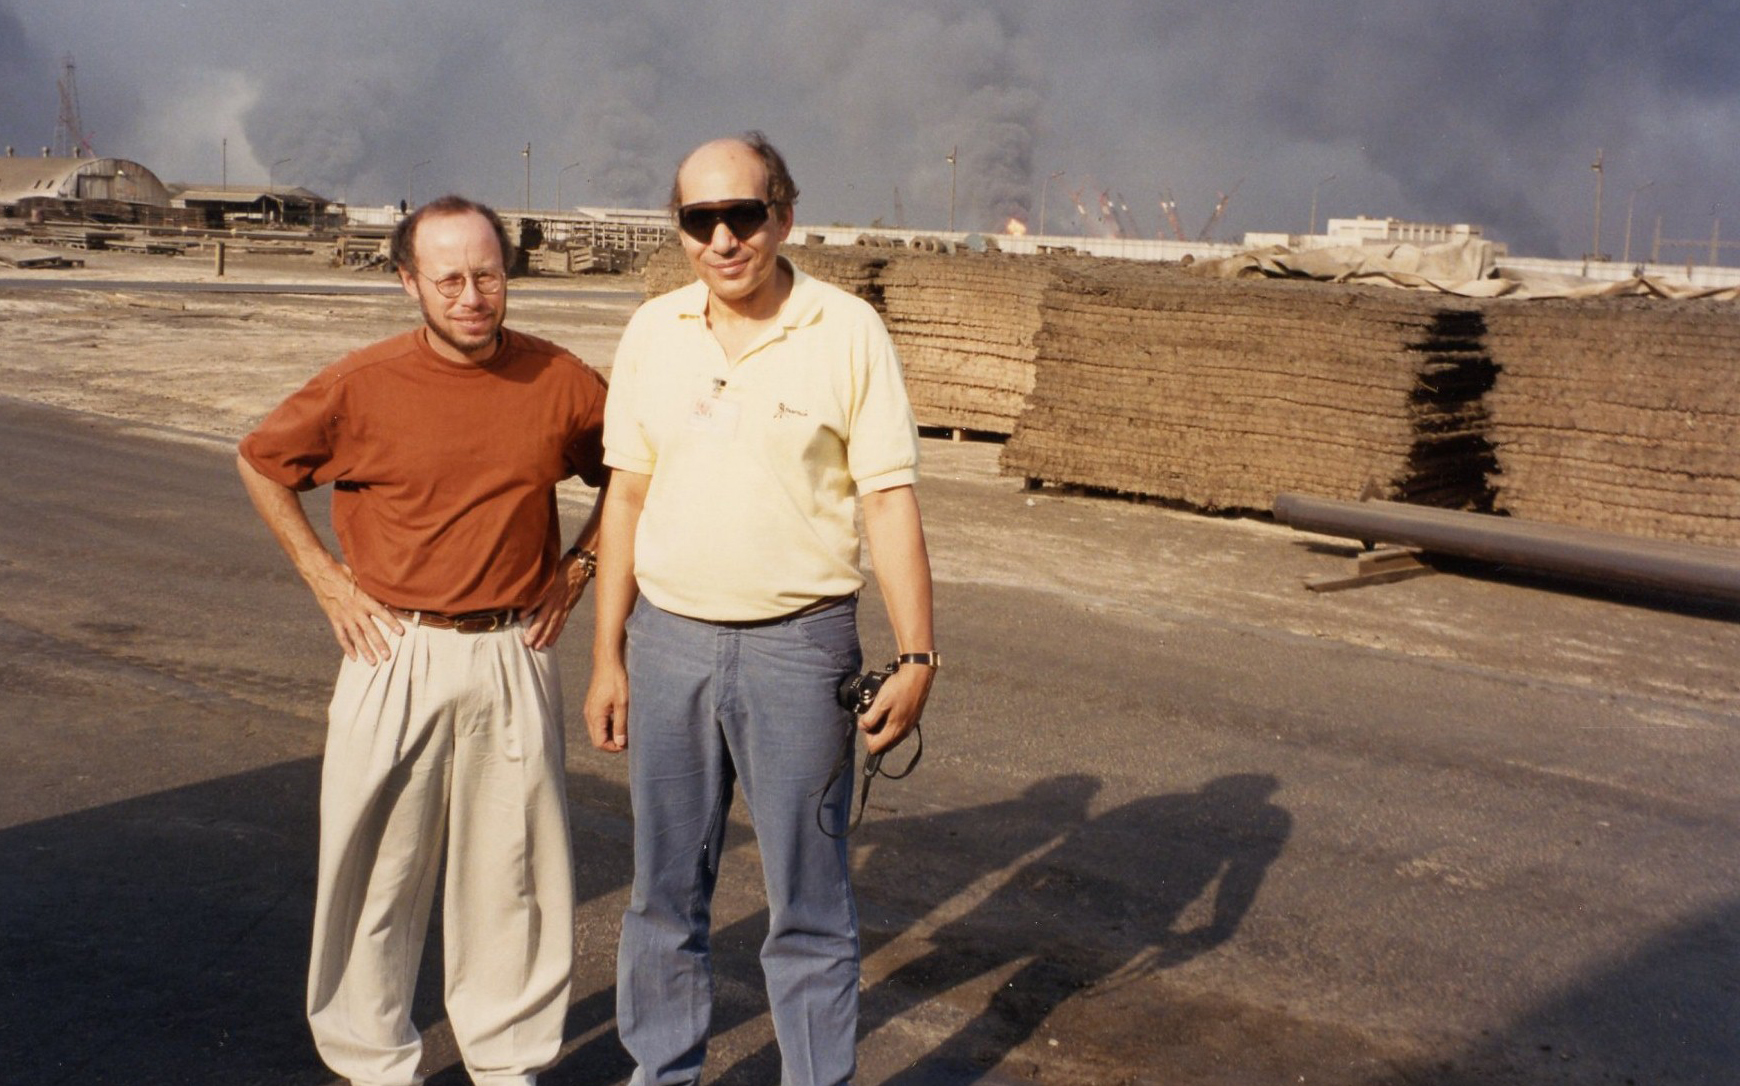 With Mark Magidson 'Baraka's producer on location in Kuwait - May 1991